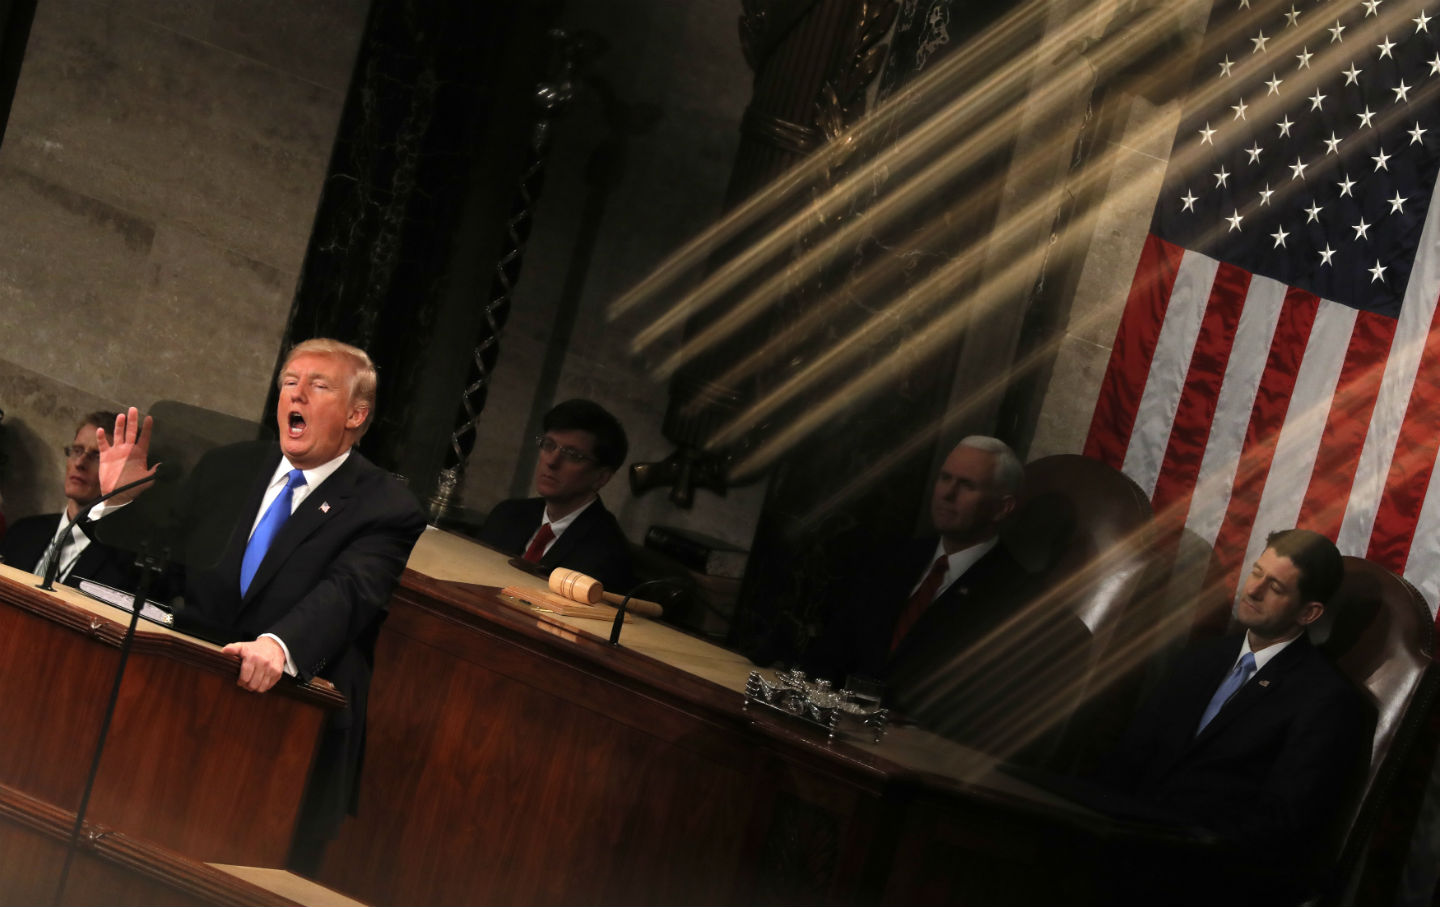 After a Dismal State of the Union, ‘We’re Going to Shake Off Trump’s Dark Shadow’